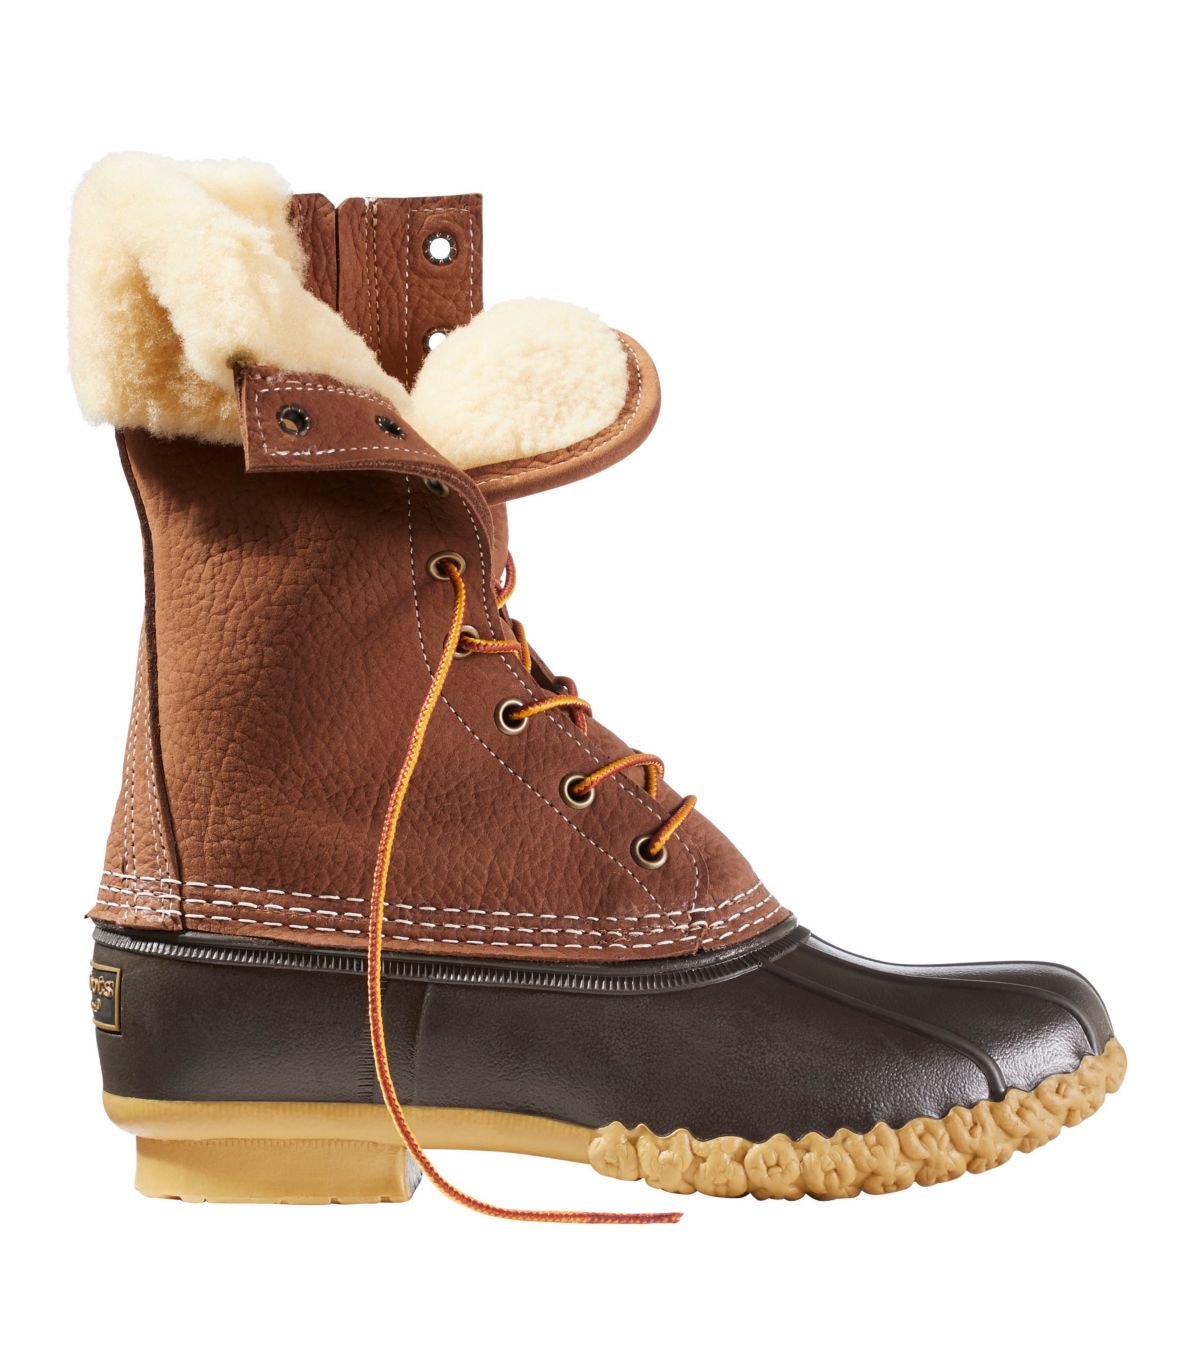 Women's Bean Boots, 10" Shearling-Lined Insulated Side Zip